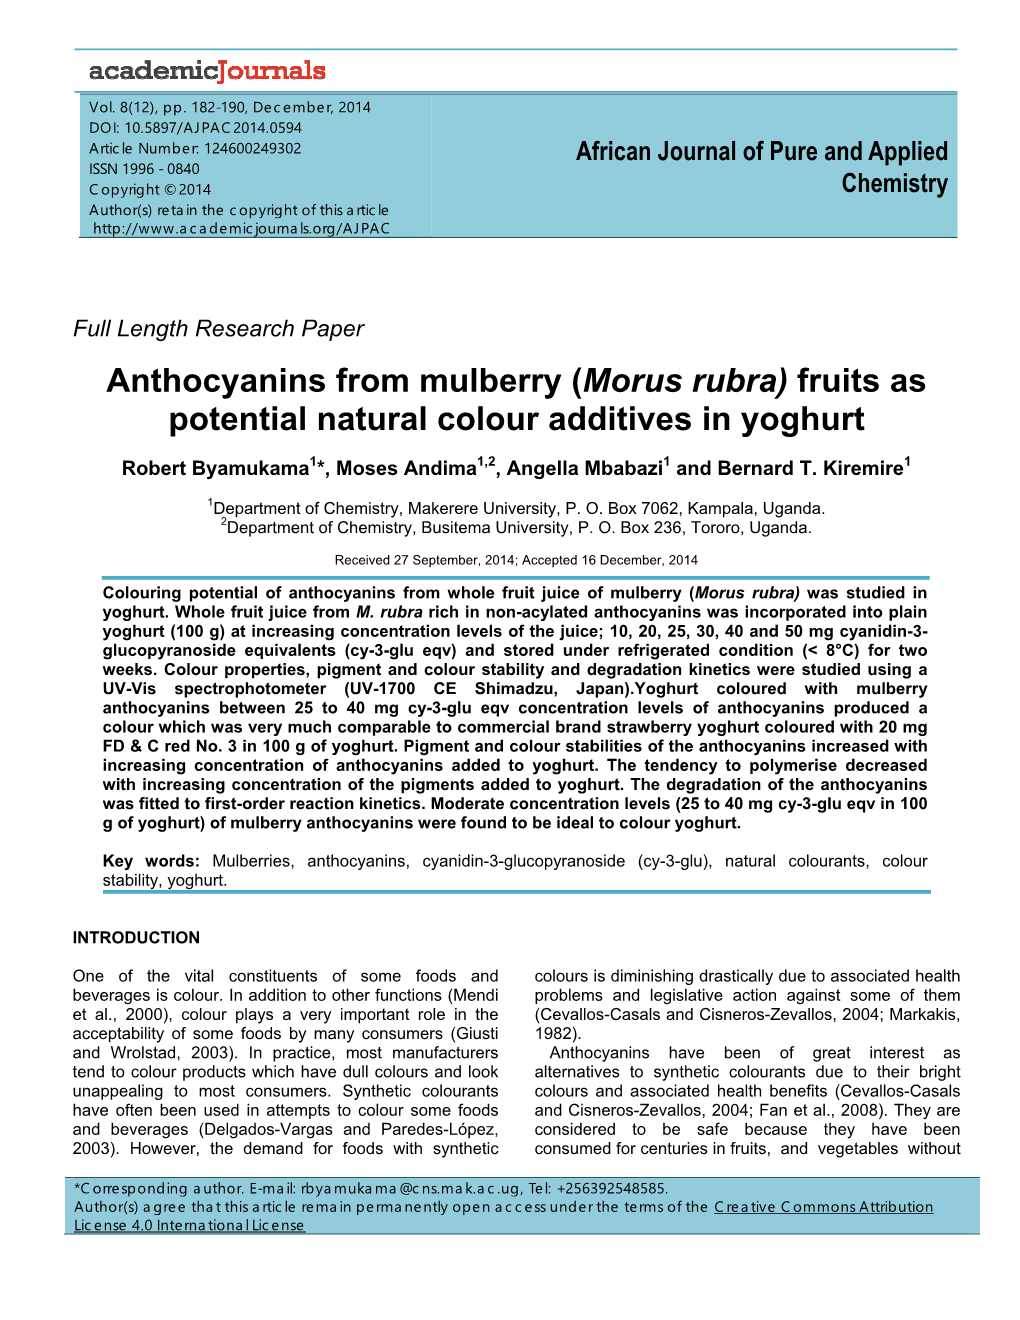 Anthocyanins from Mulberry (Morus Rubra) Fruits As Potential Natural Colour Additives in Yoghurt